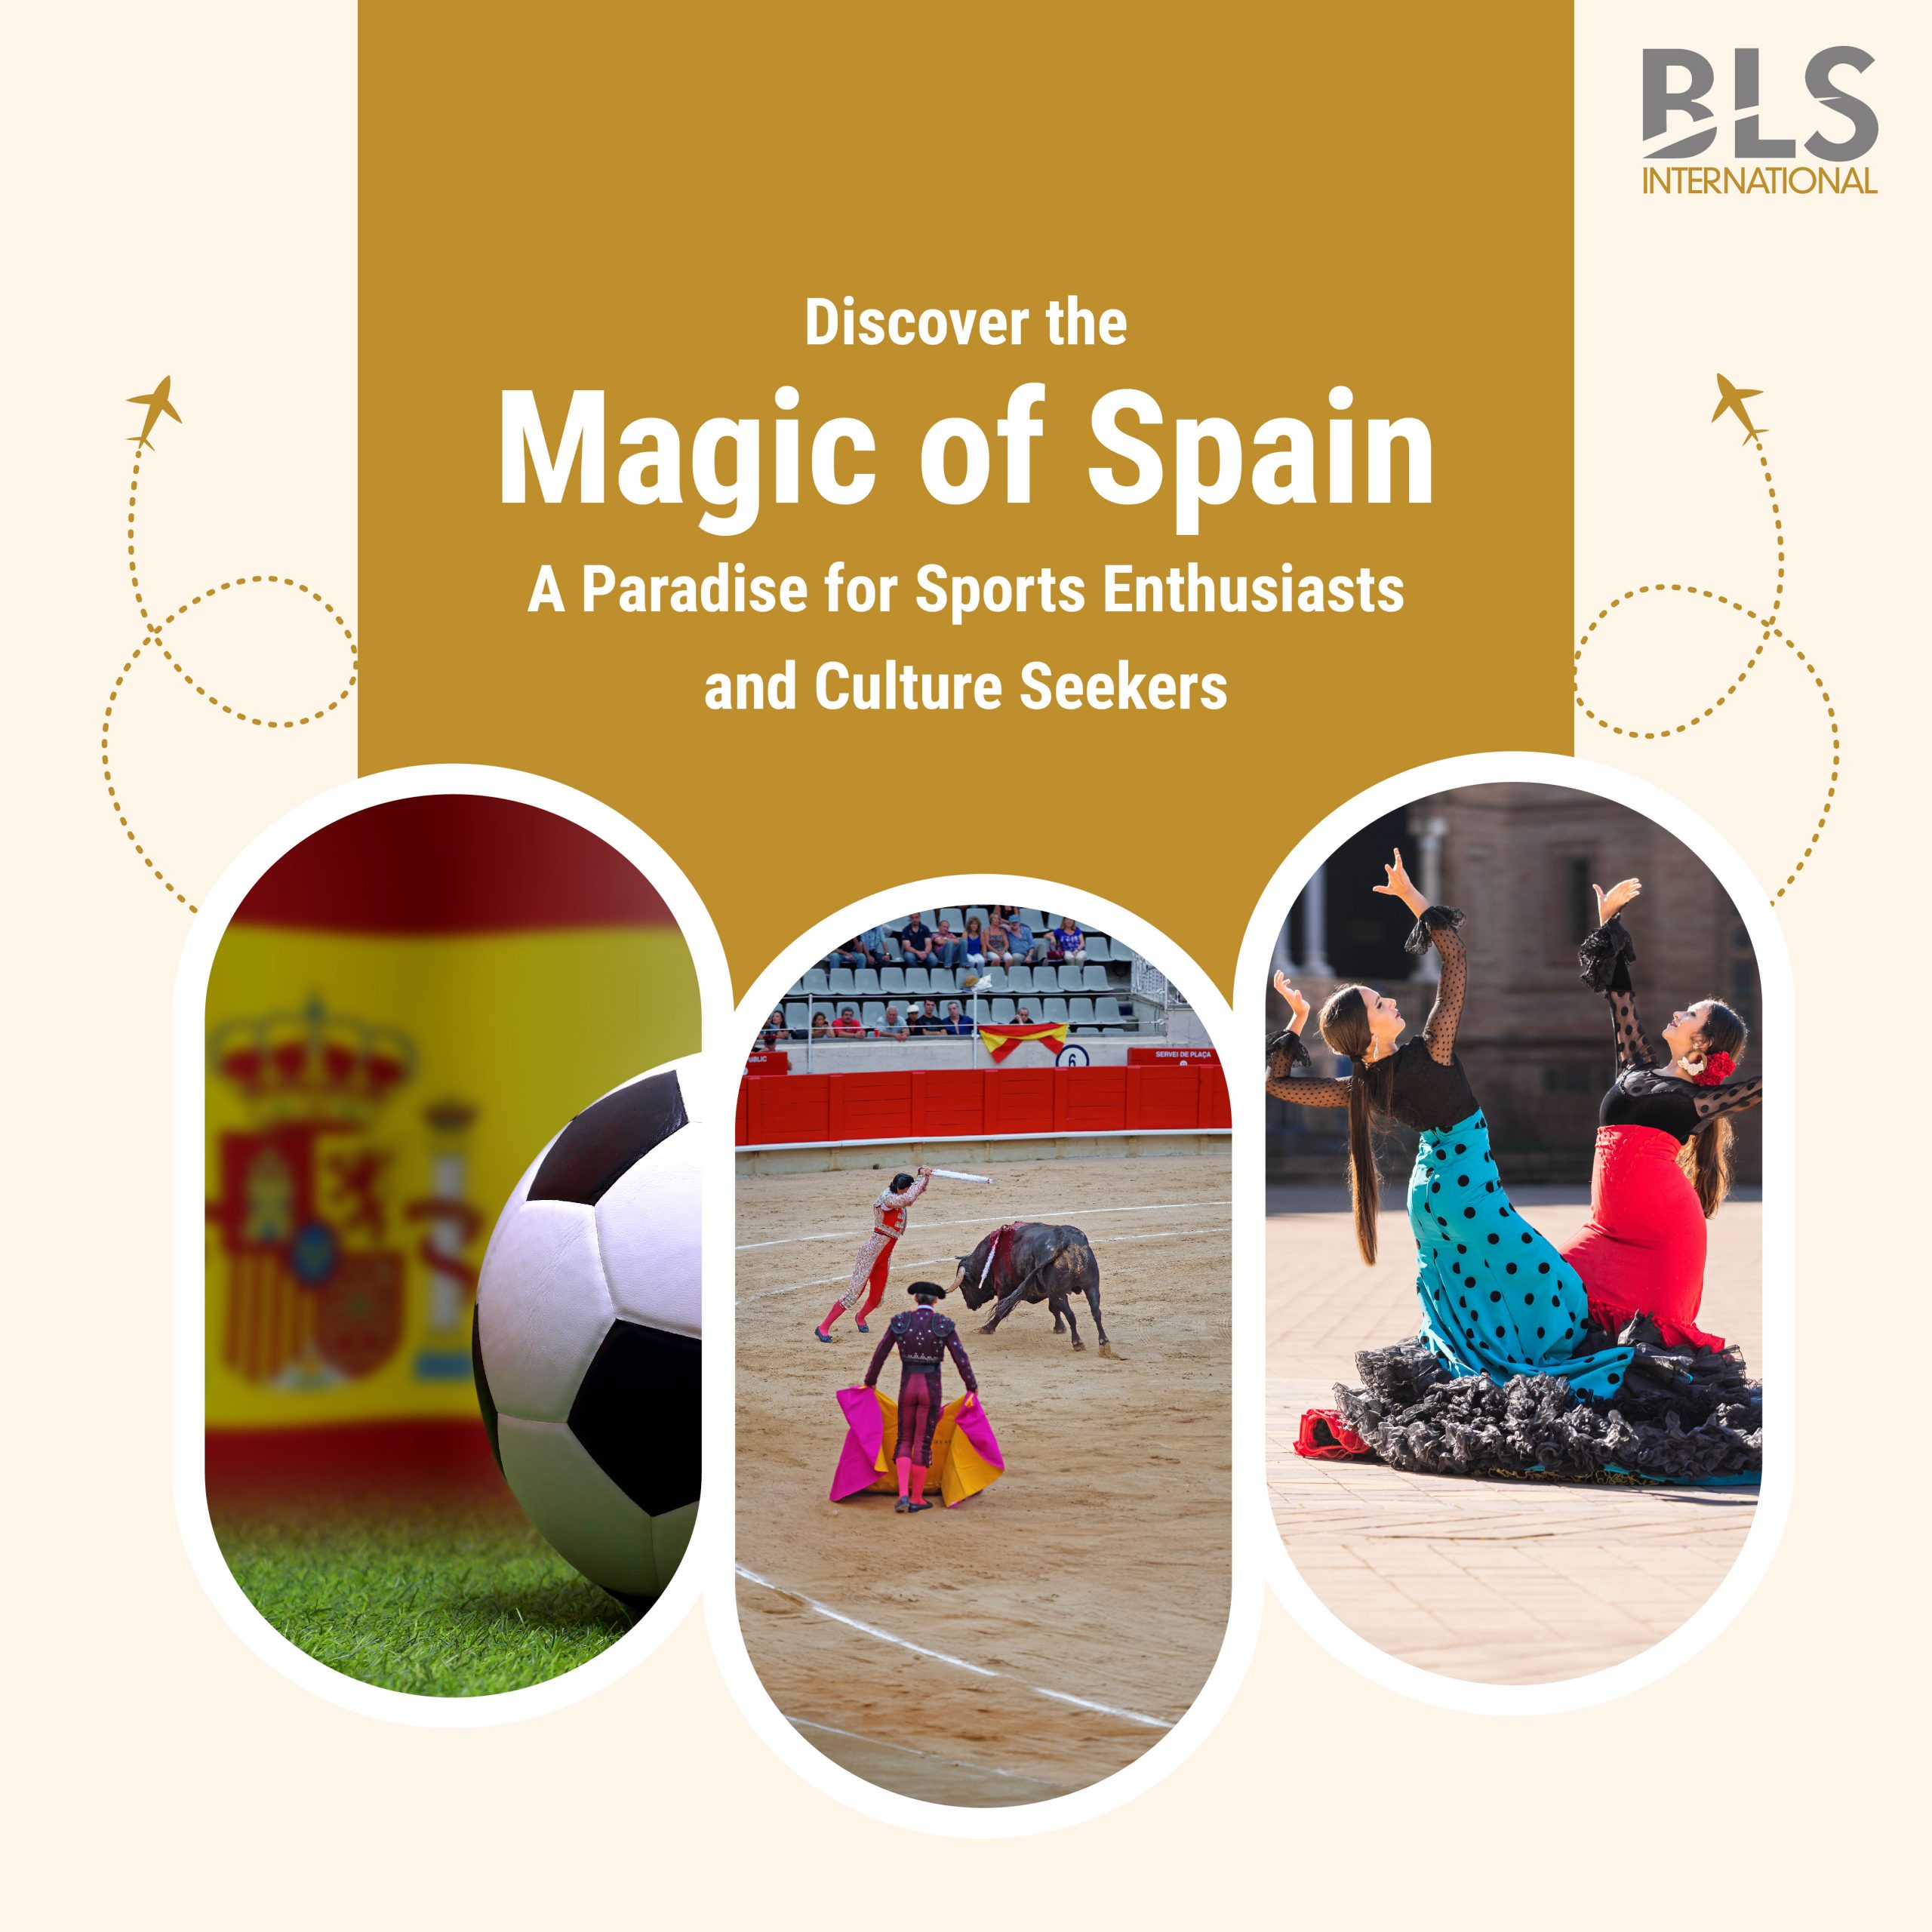 Discover the Magic of Spain: A Paradise for Sports Enthusiasts and Culture Seekers